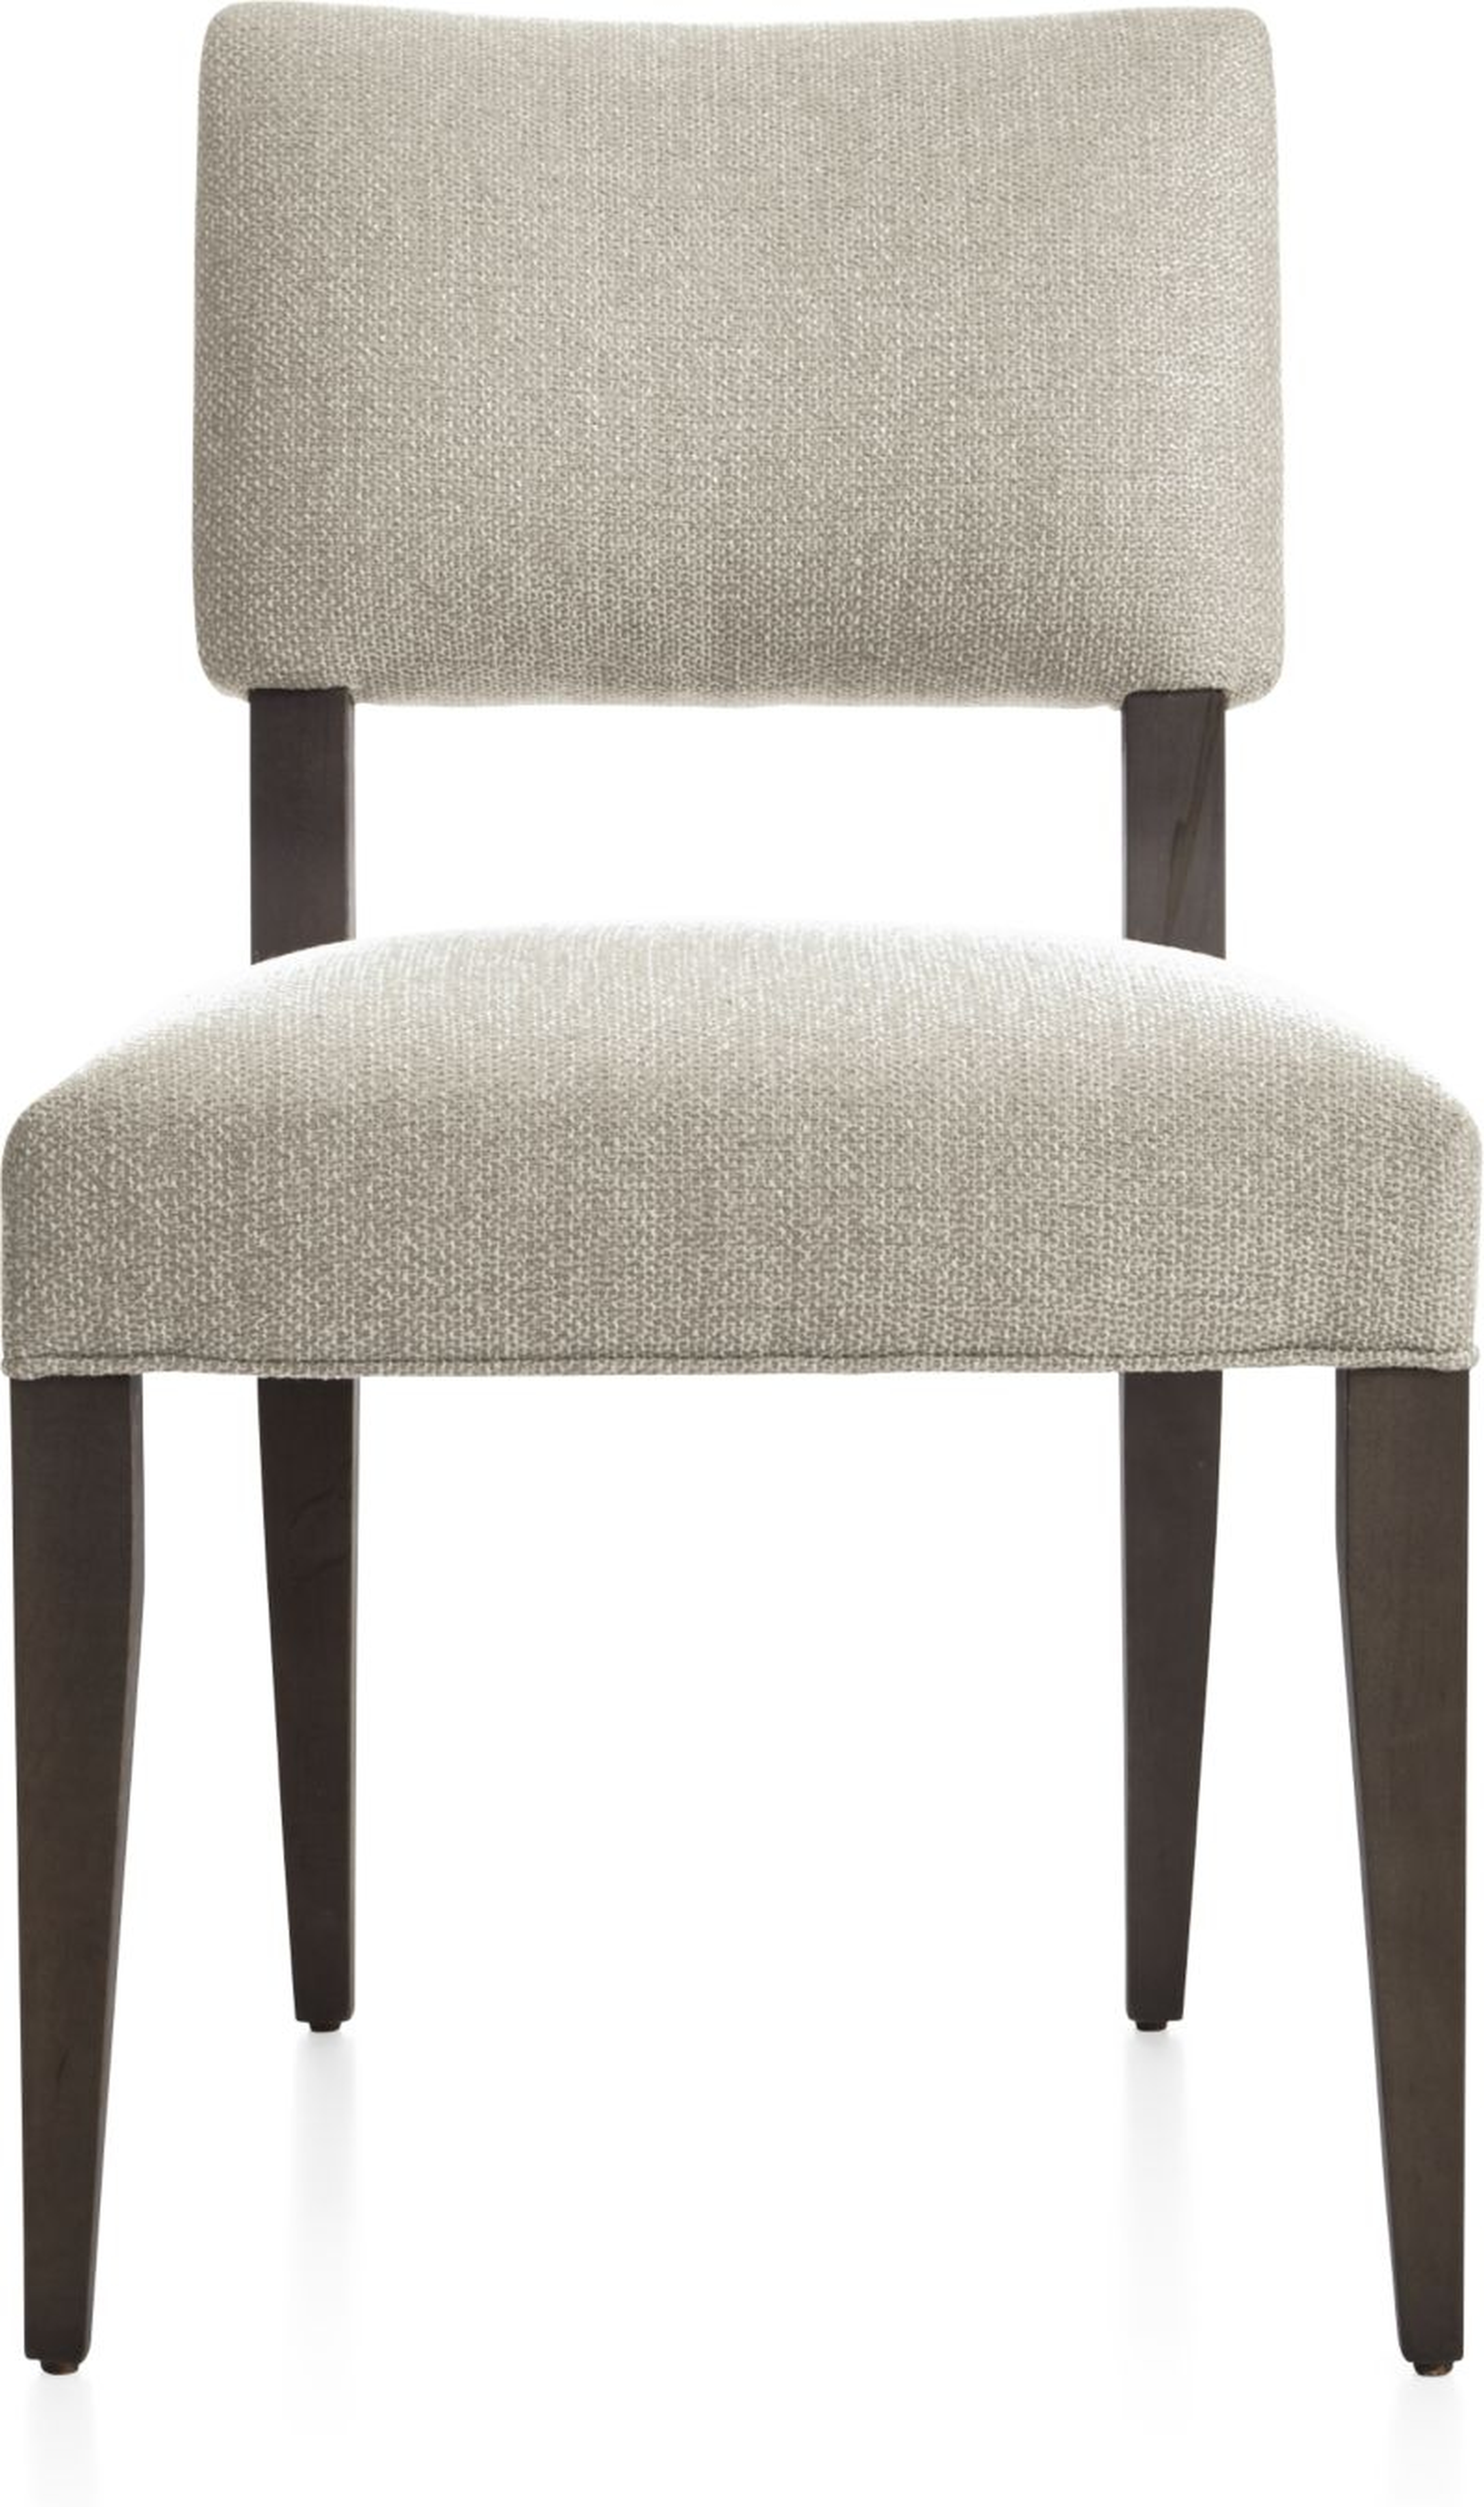 Cody Upholstered Dining Chair - Crate and Barrel